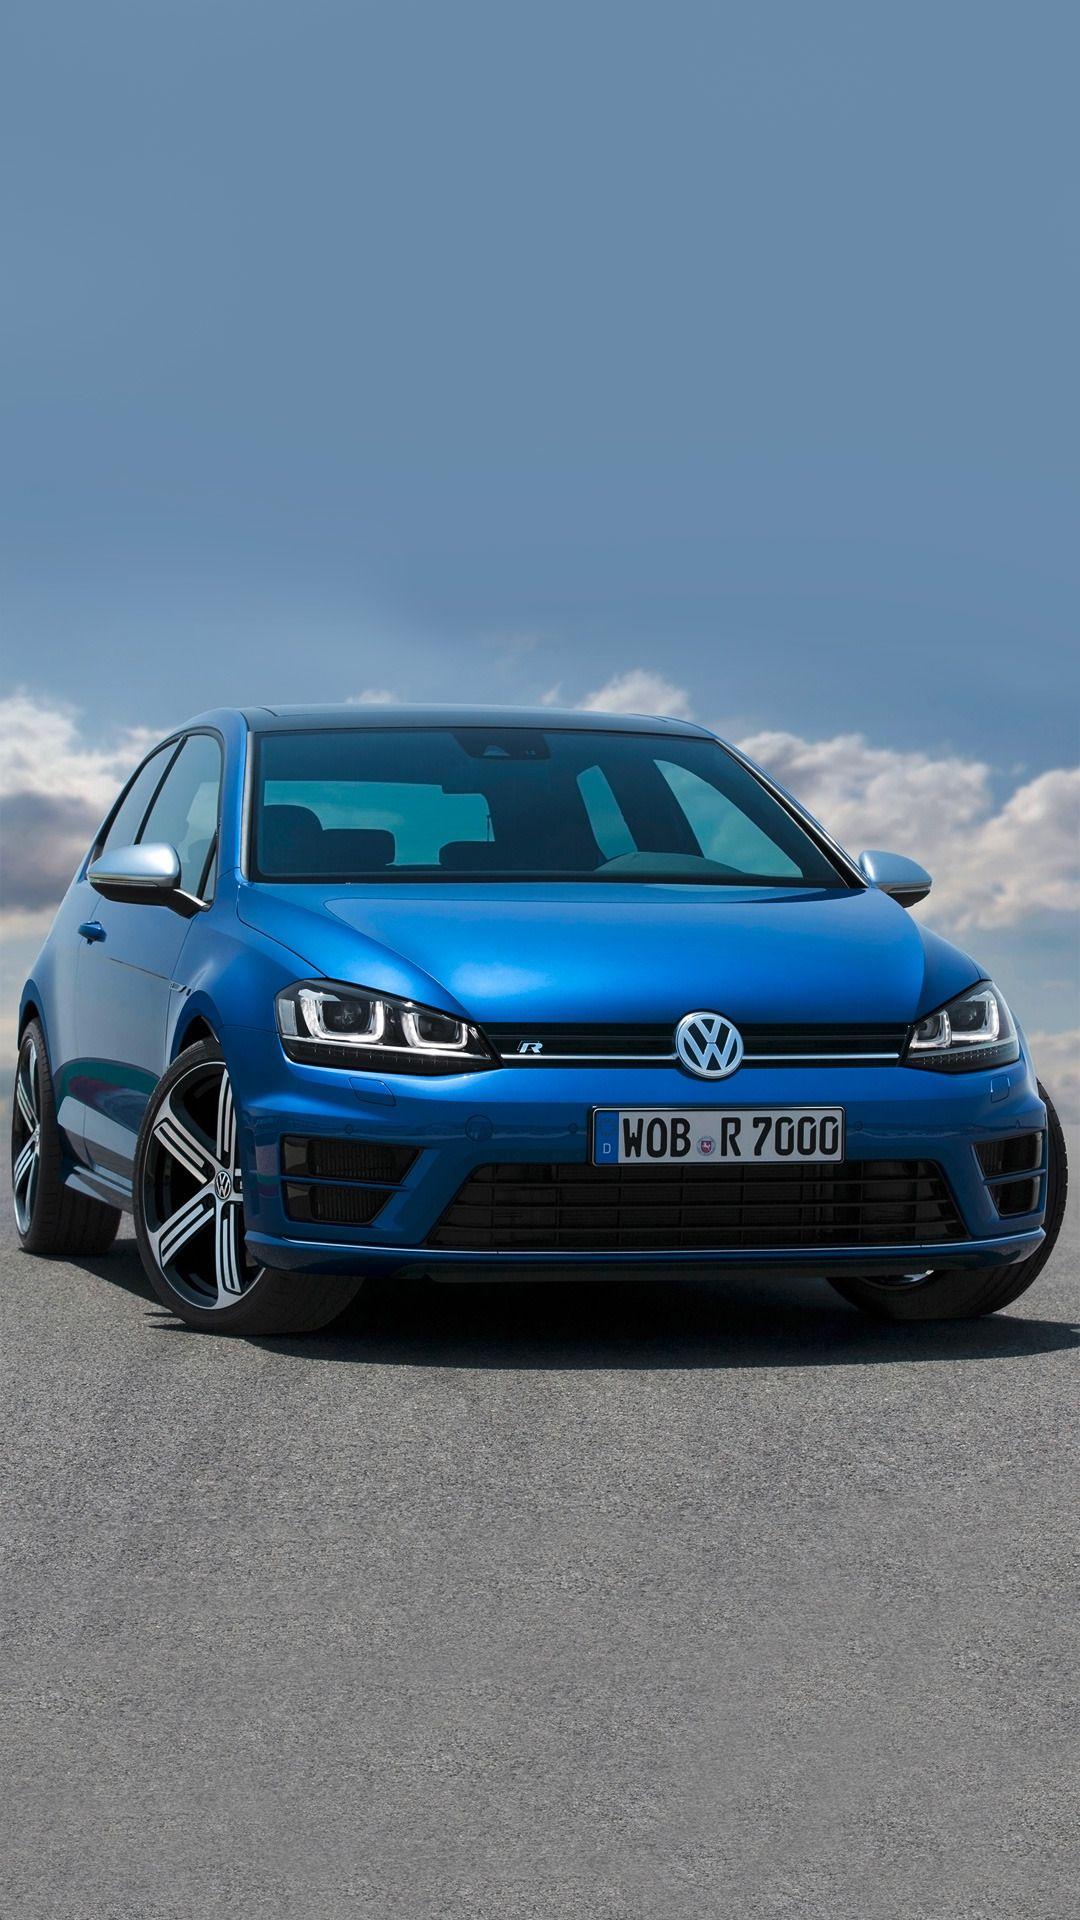 Volkswagen Golf 7K wallpaper, free and easy to download